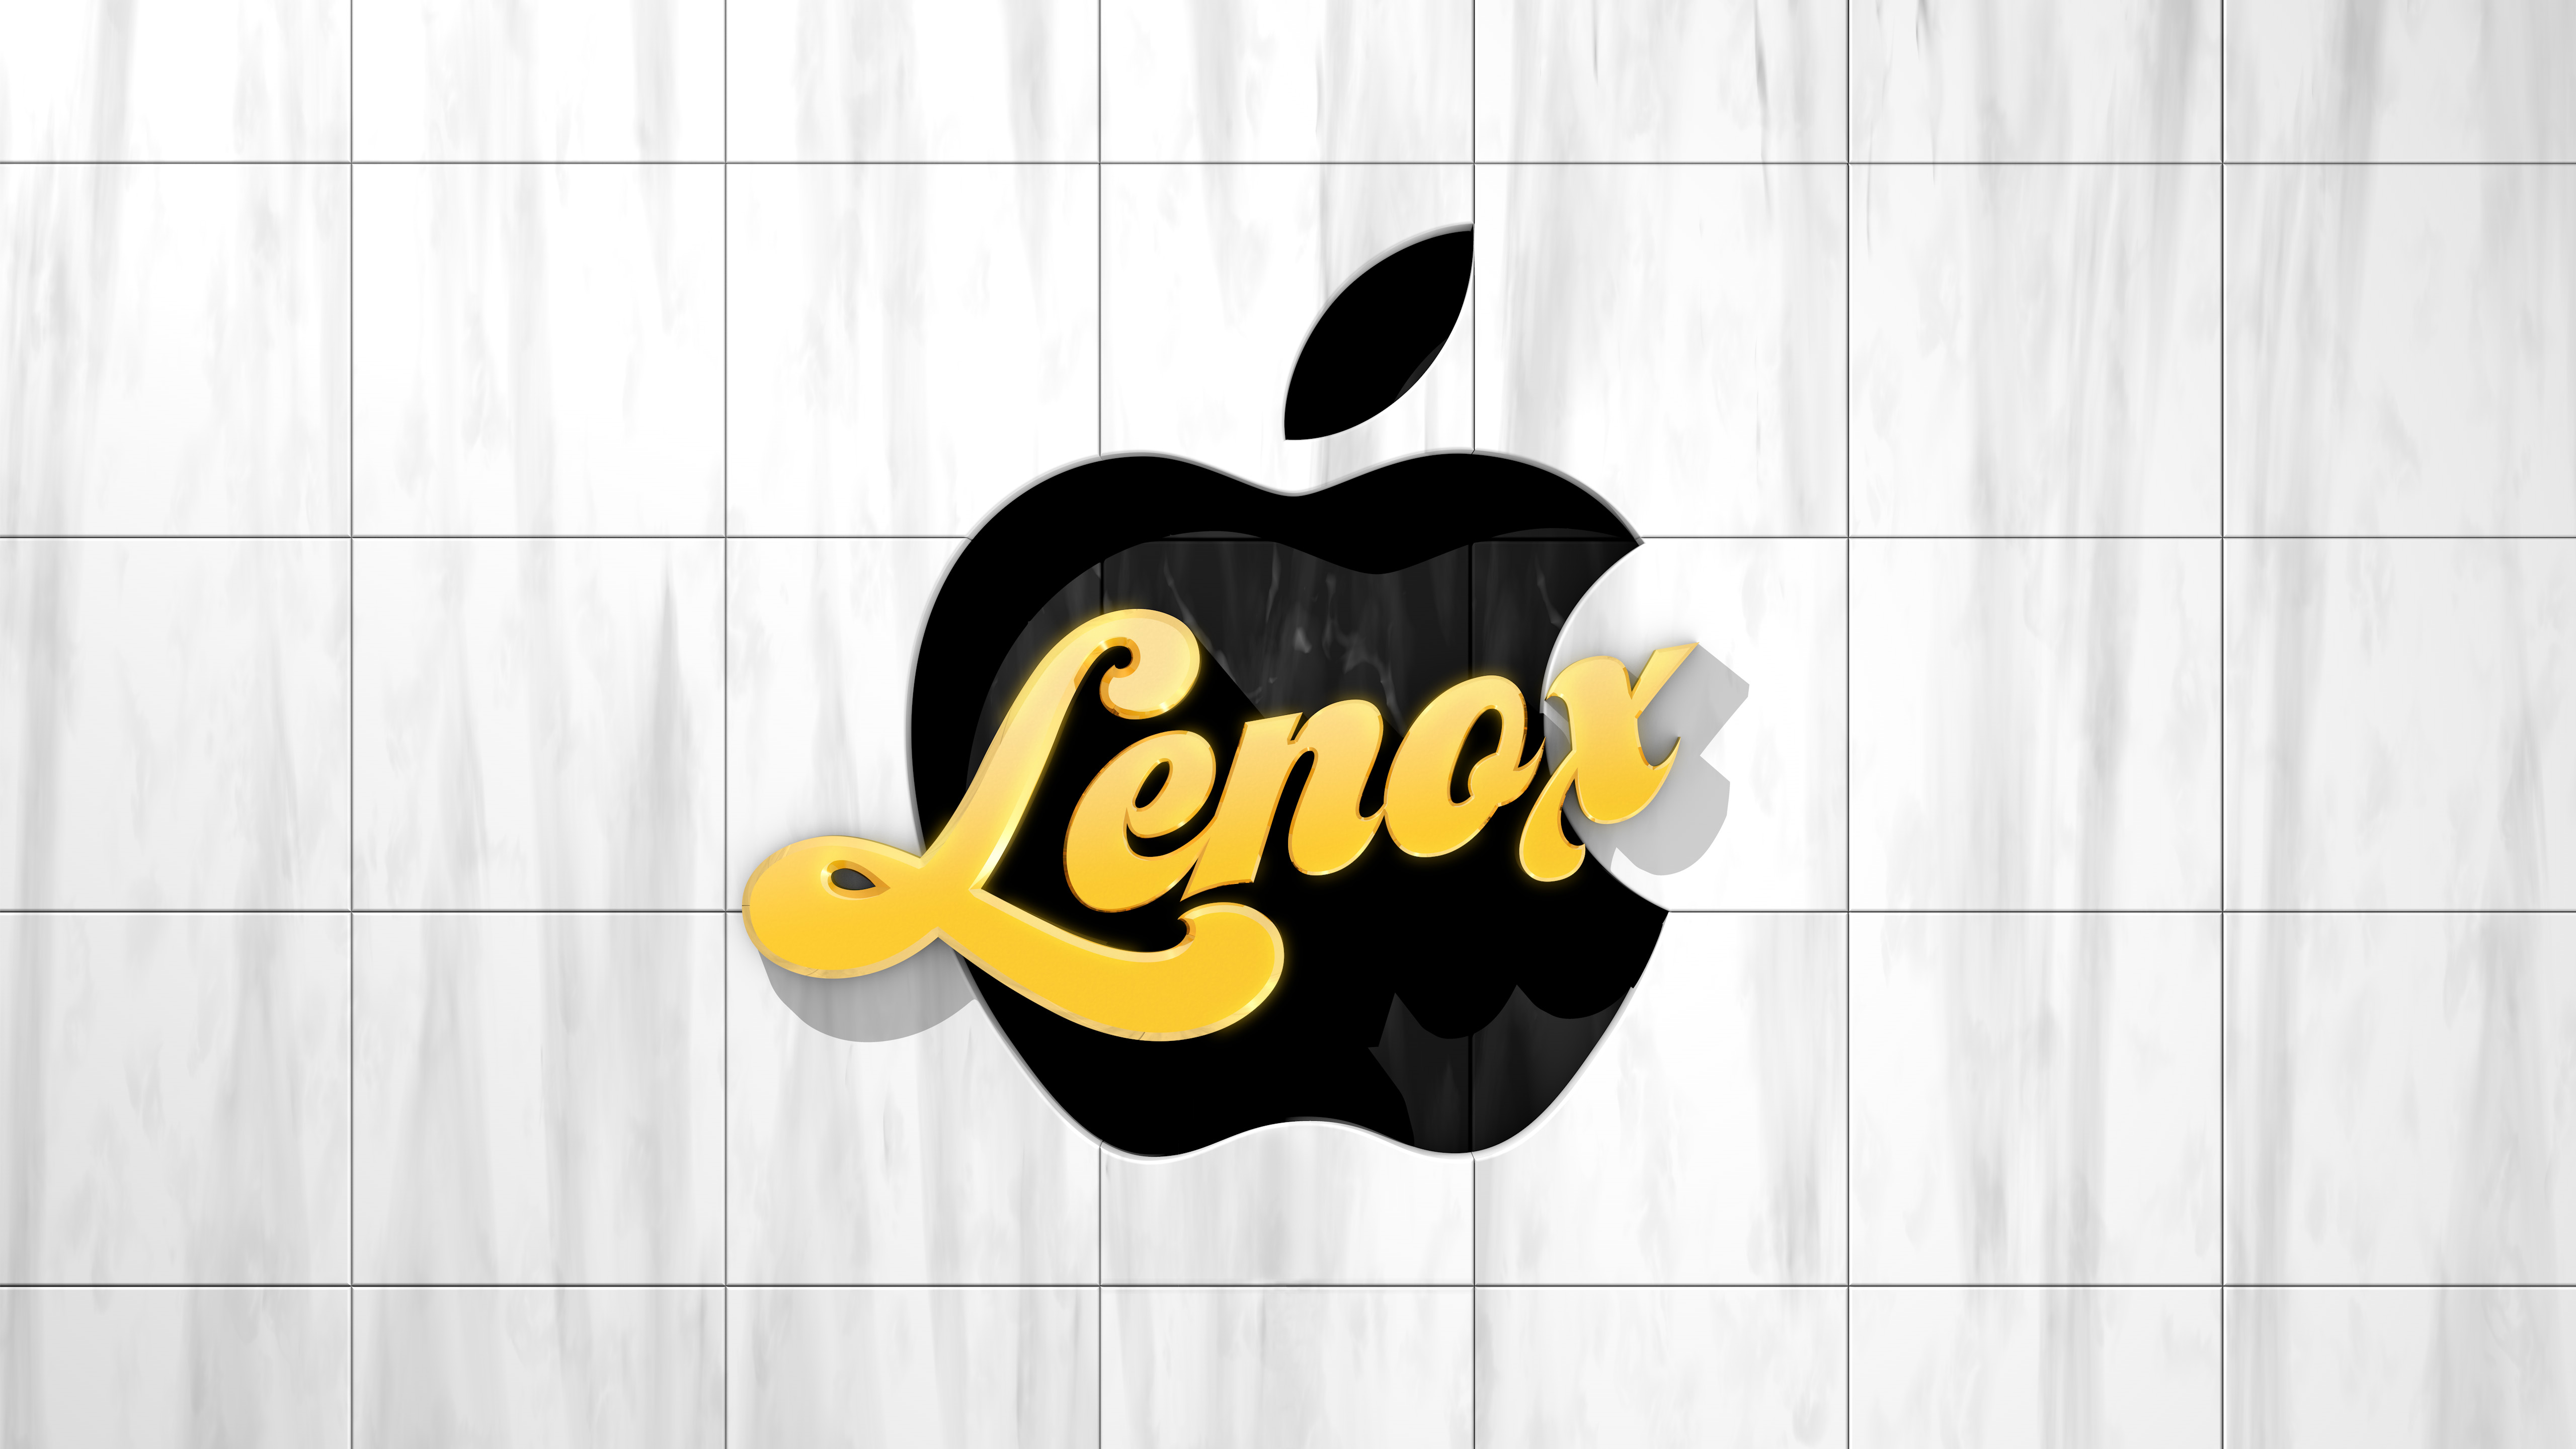 Tomorrow's News Today - Atlanta: [EXCLUSIVE] Apple Targeting September 2020  Opening for Flagship at Lenox Square